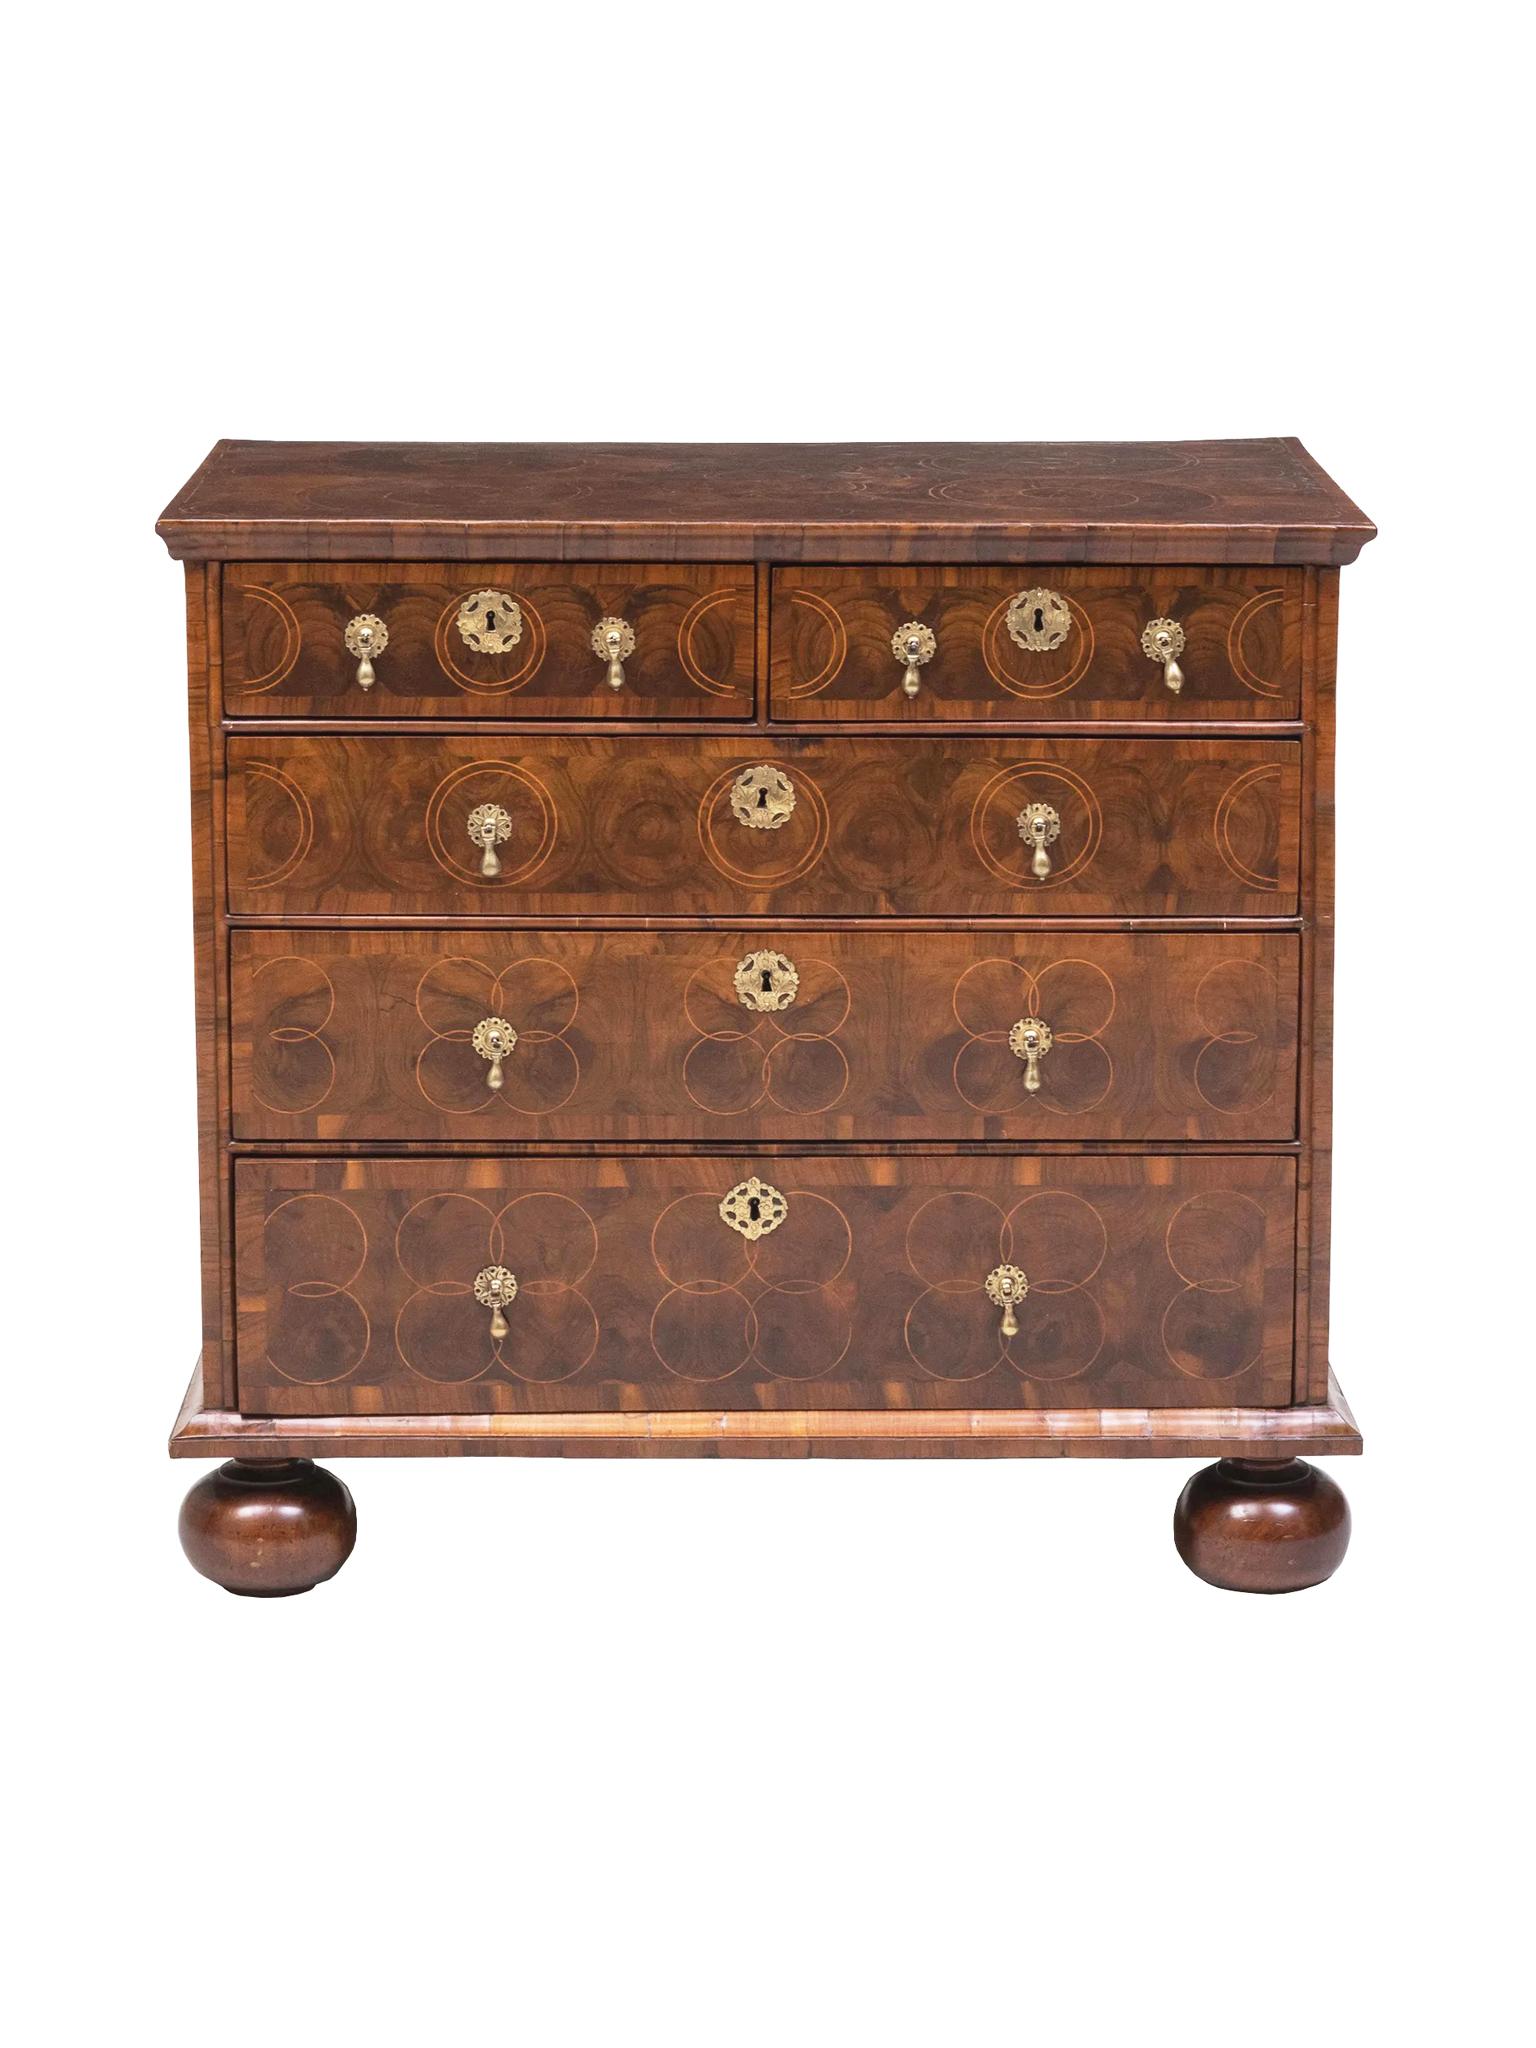 This outstanding William & Mary chest of drawers has been well-cared for over the centuries. We love the exquisite veneer and oyster inlay that decorate the surfaces in intricate concentric and floral designs. The chest has had beautiful restoration